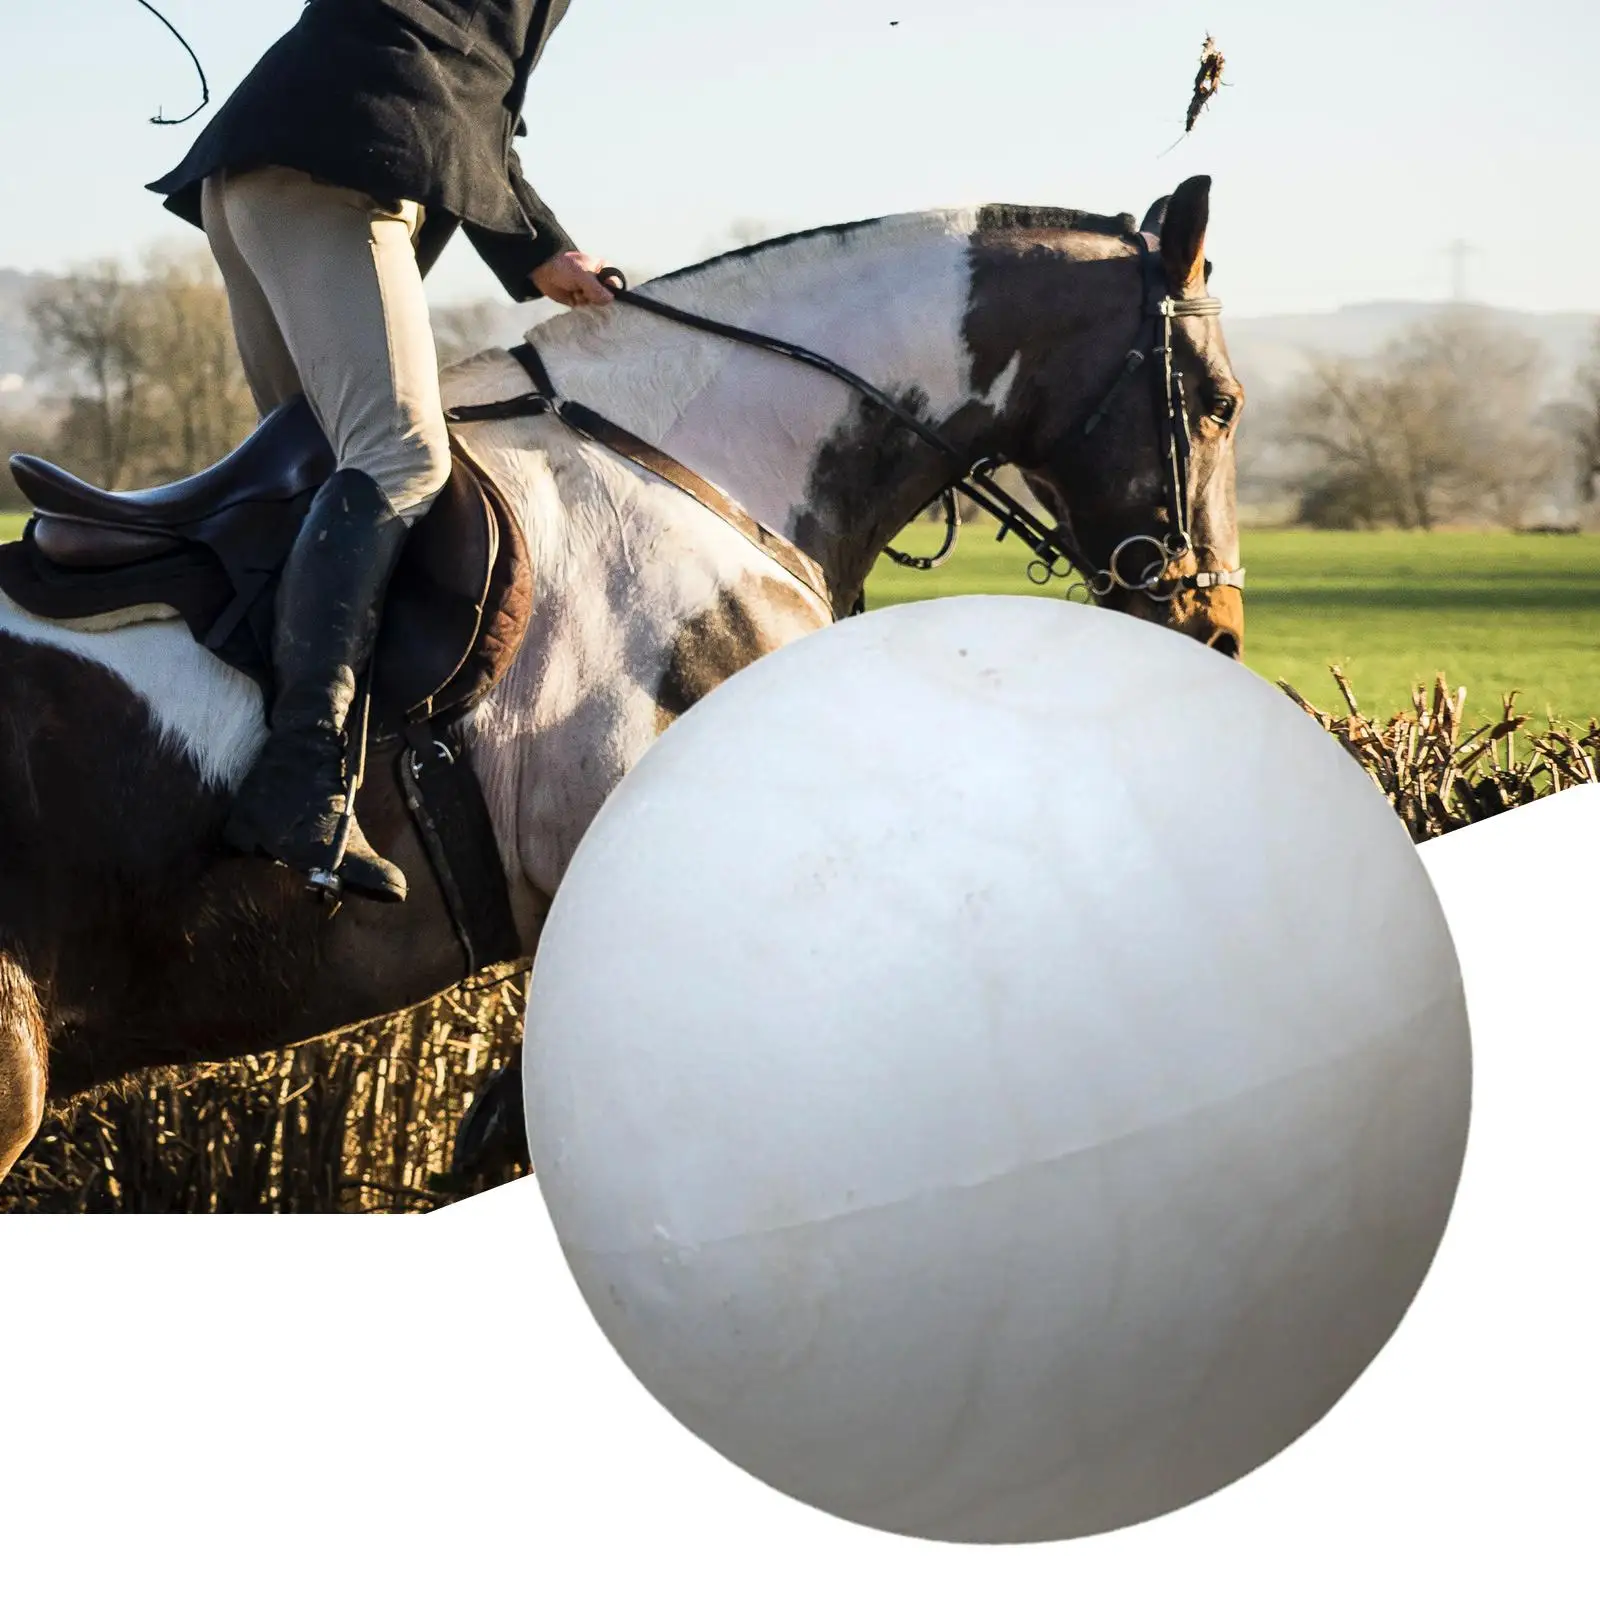 Toss Jolly Play Ball PC Wear Resistant Horse Play Ball for Sheep Horse Play Tugging Juggling